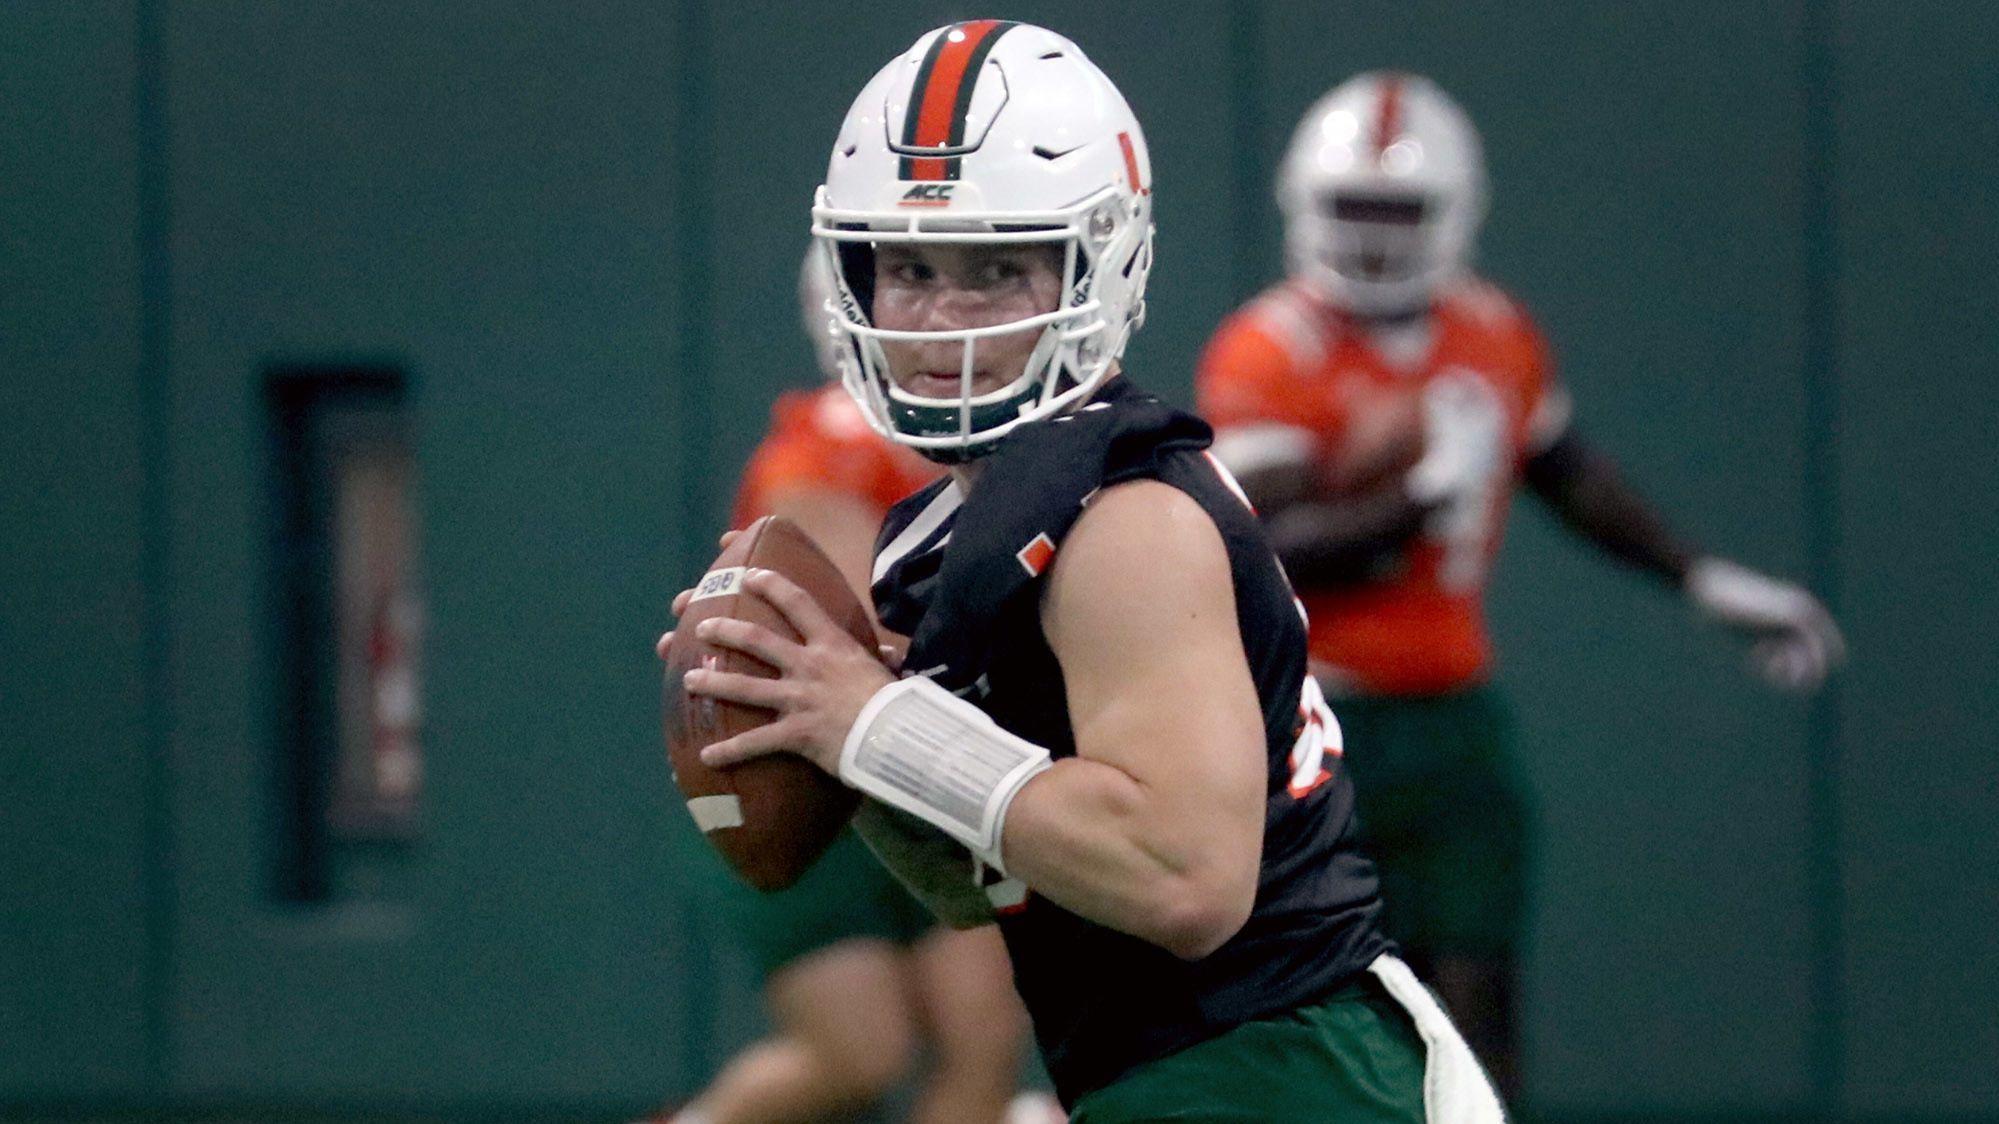 UM quarterback Tate Martell looking to add to Miami's 'history' and